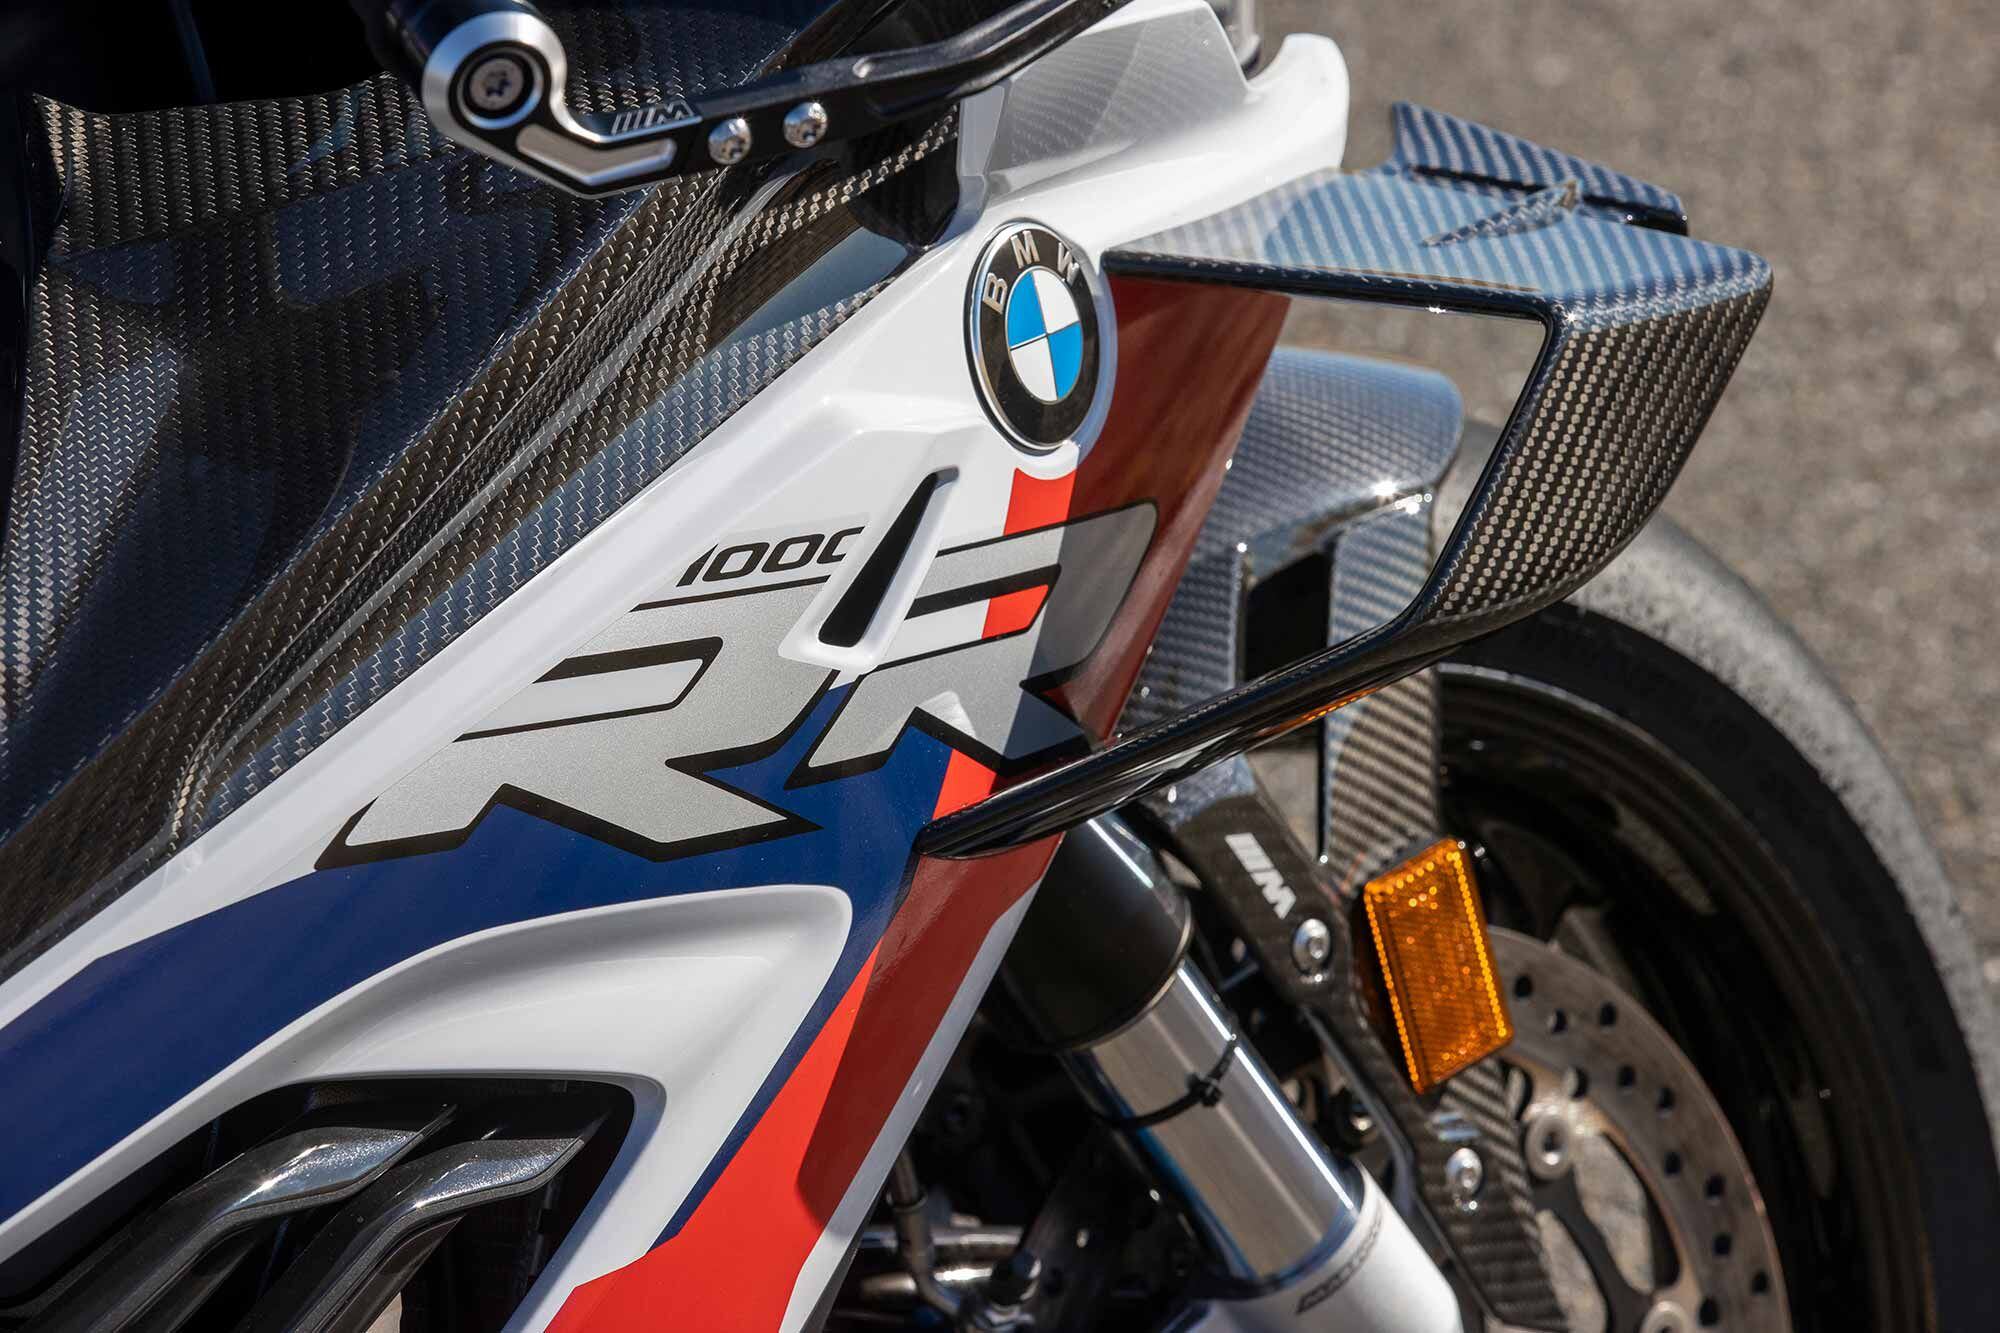 Subjectively, the BMW M 1000 RR’s wings are the most eye-catching of the bunch, providing critical downforce under hard acceleration.